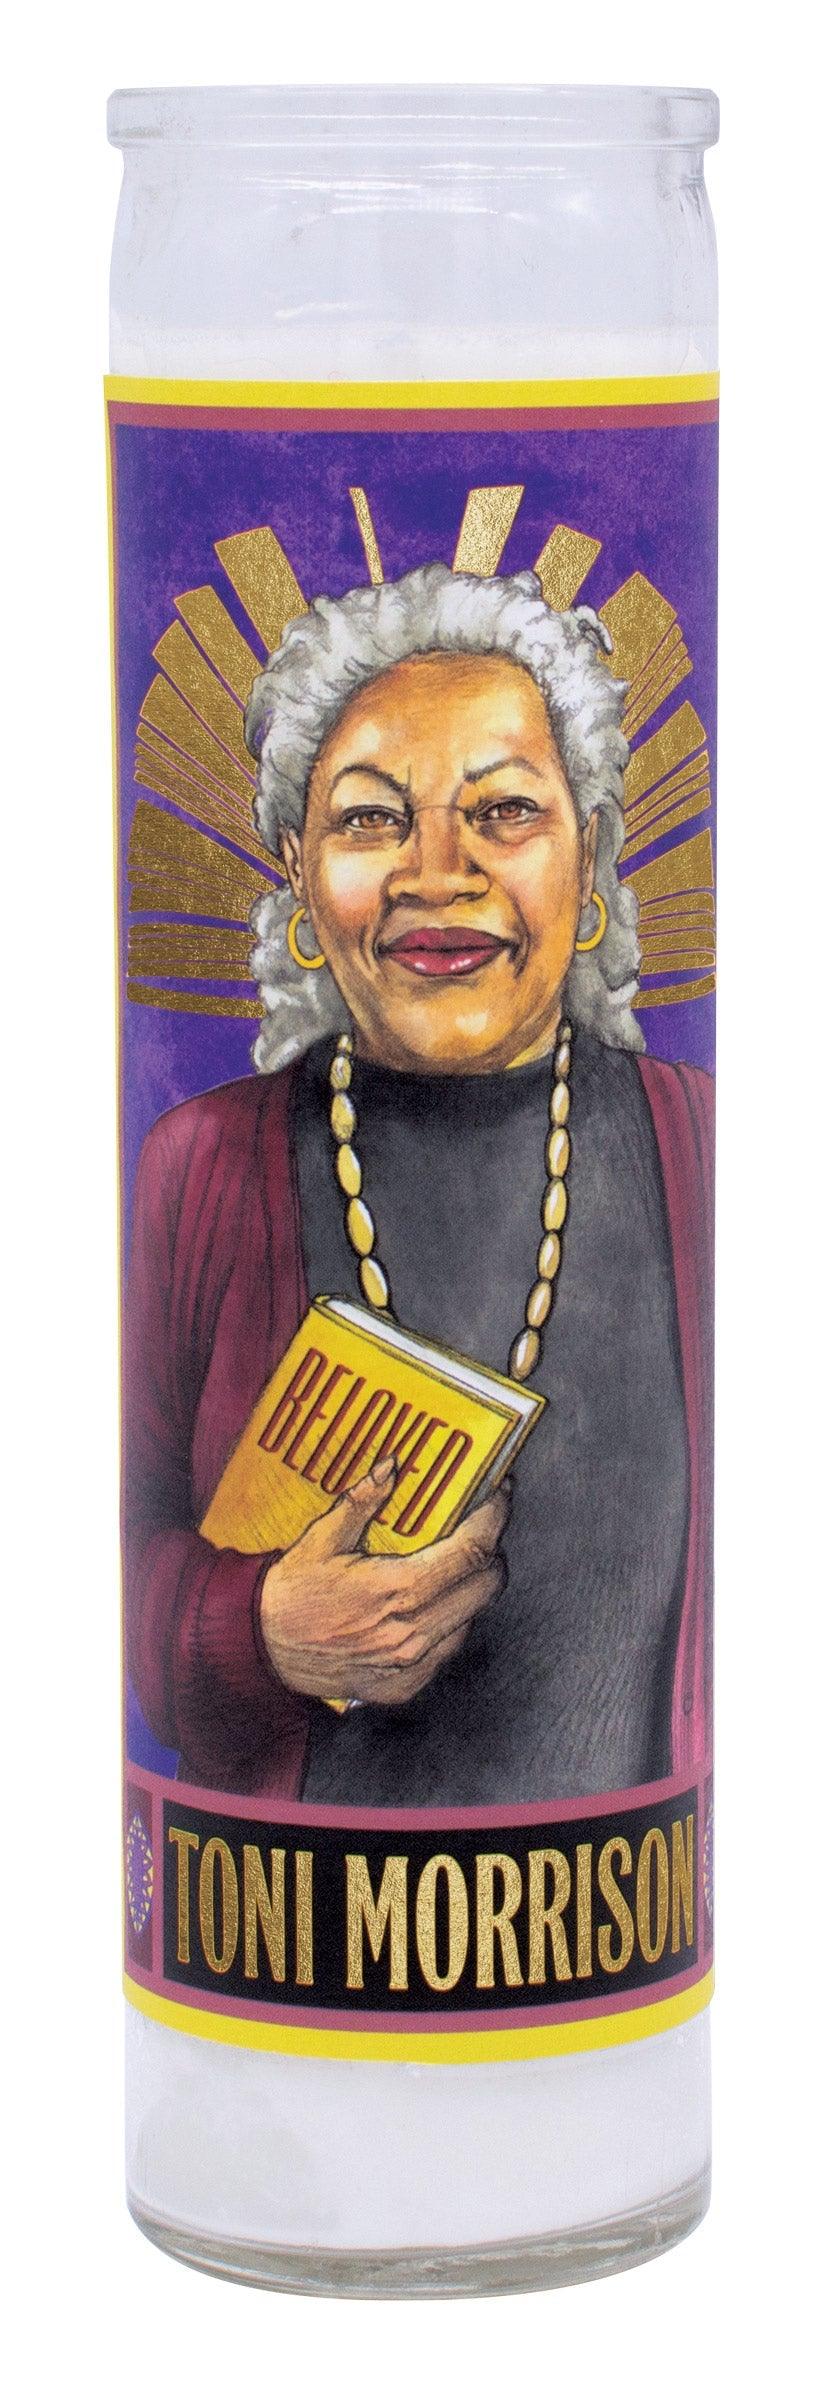 Product photo of Toni Morrison Secular Saint Candle, a novelty gift manufactured by The Unemployed Philosophers Guild.